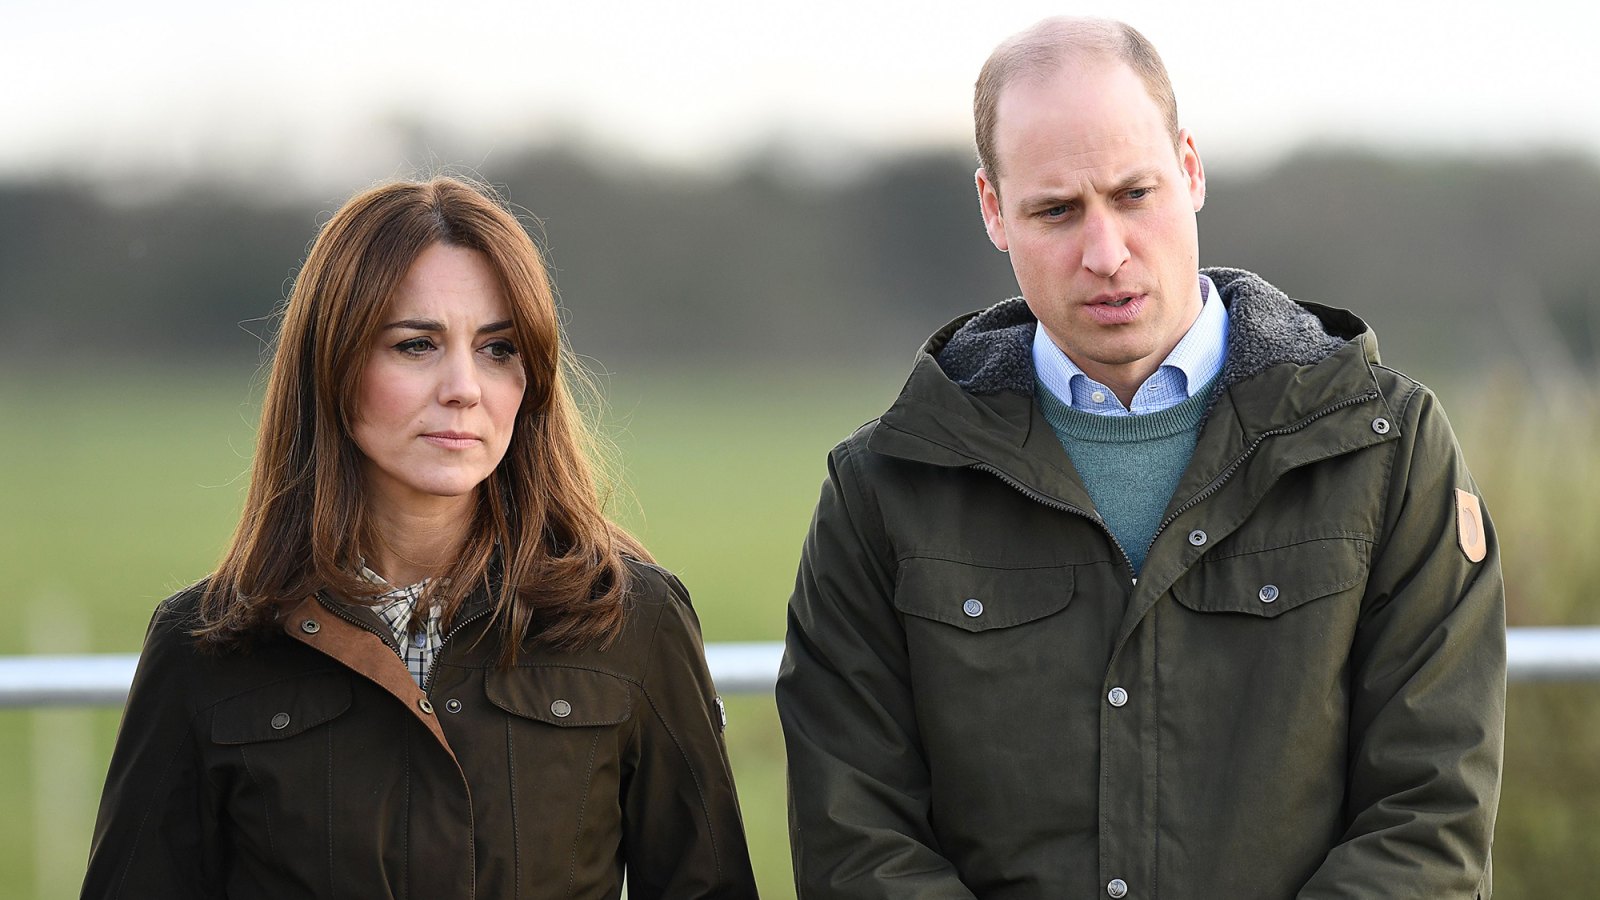 Prince William and Duchess Kate Issue Statement on Russian Invasion: 'We Stand With All of Ukraine's People'